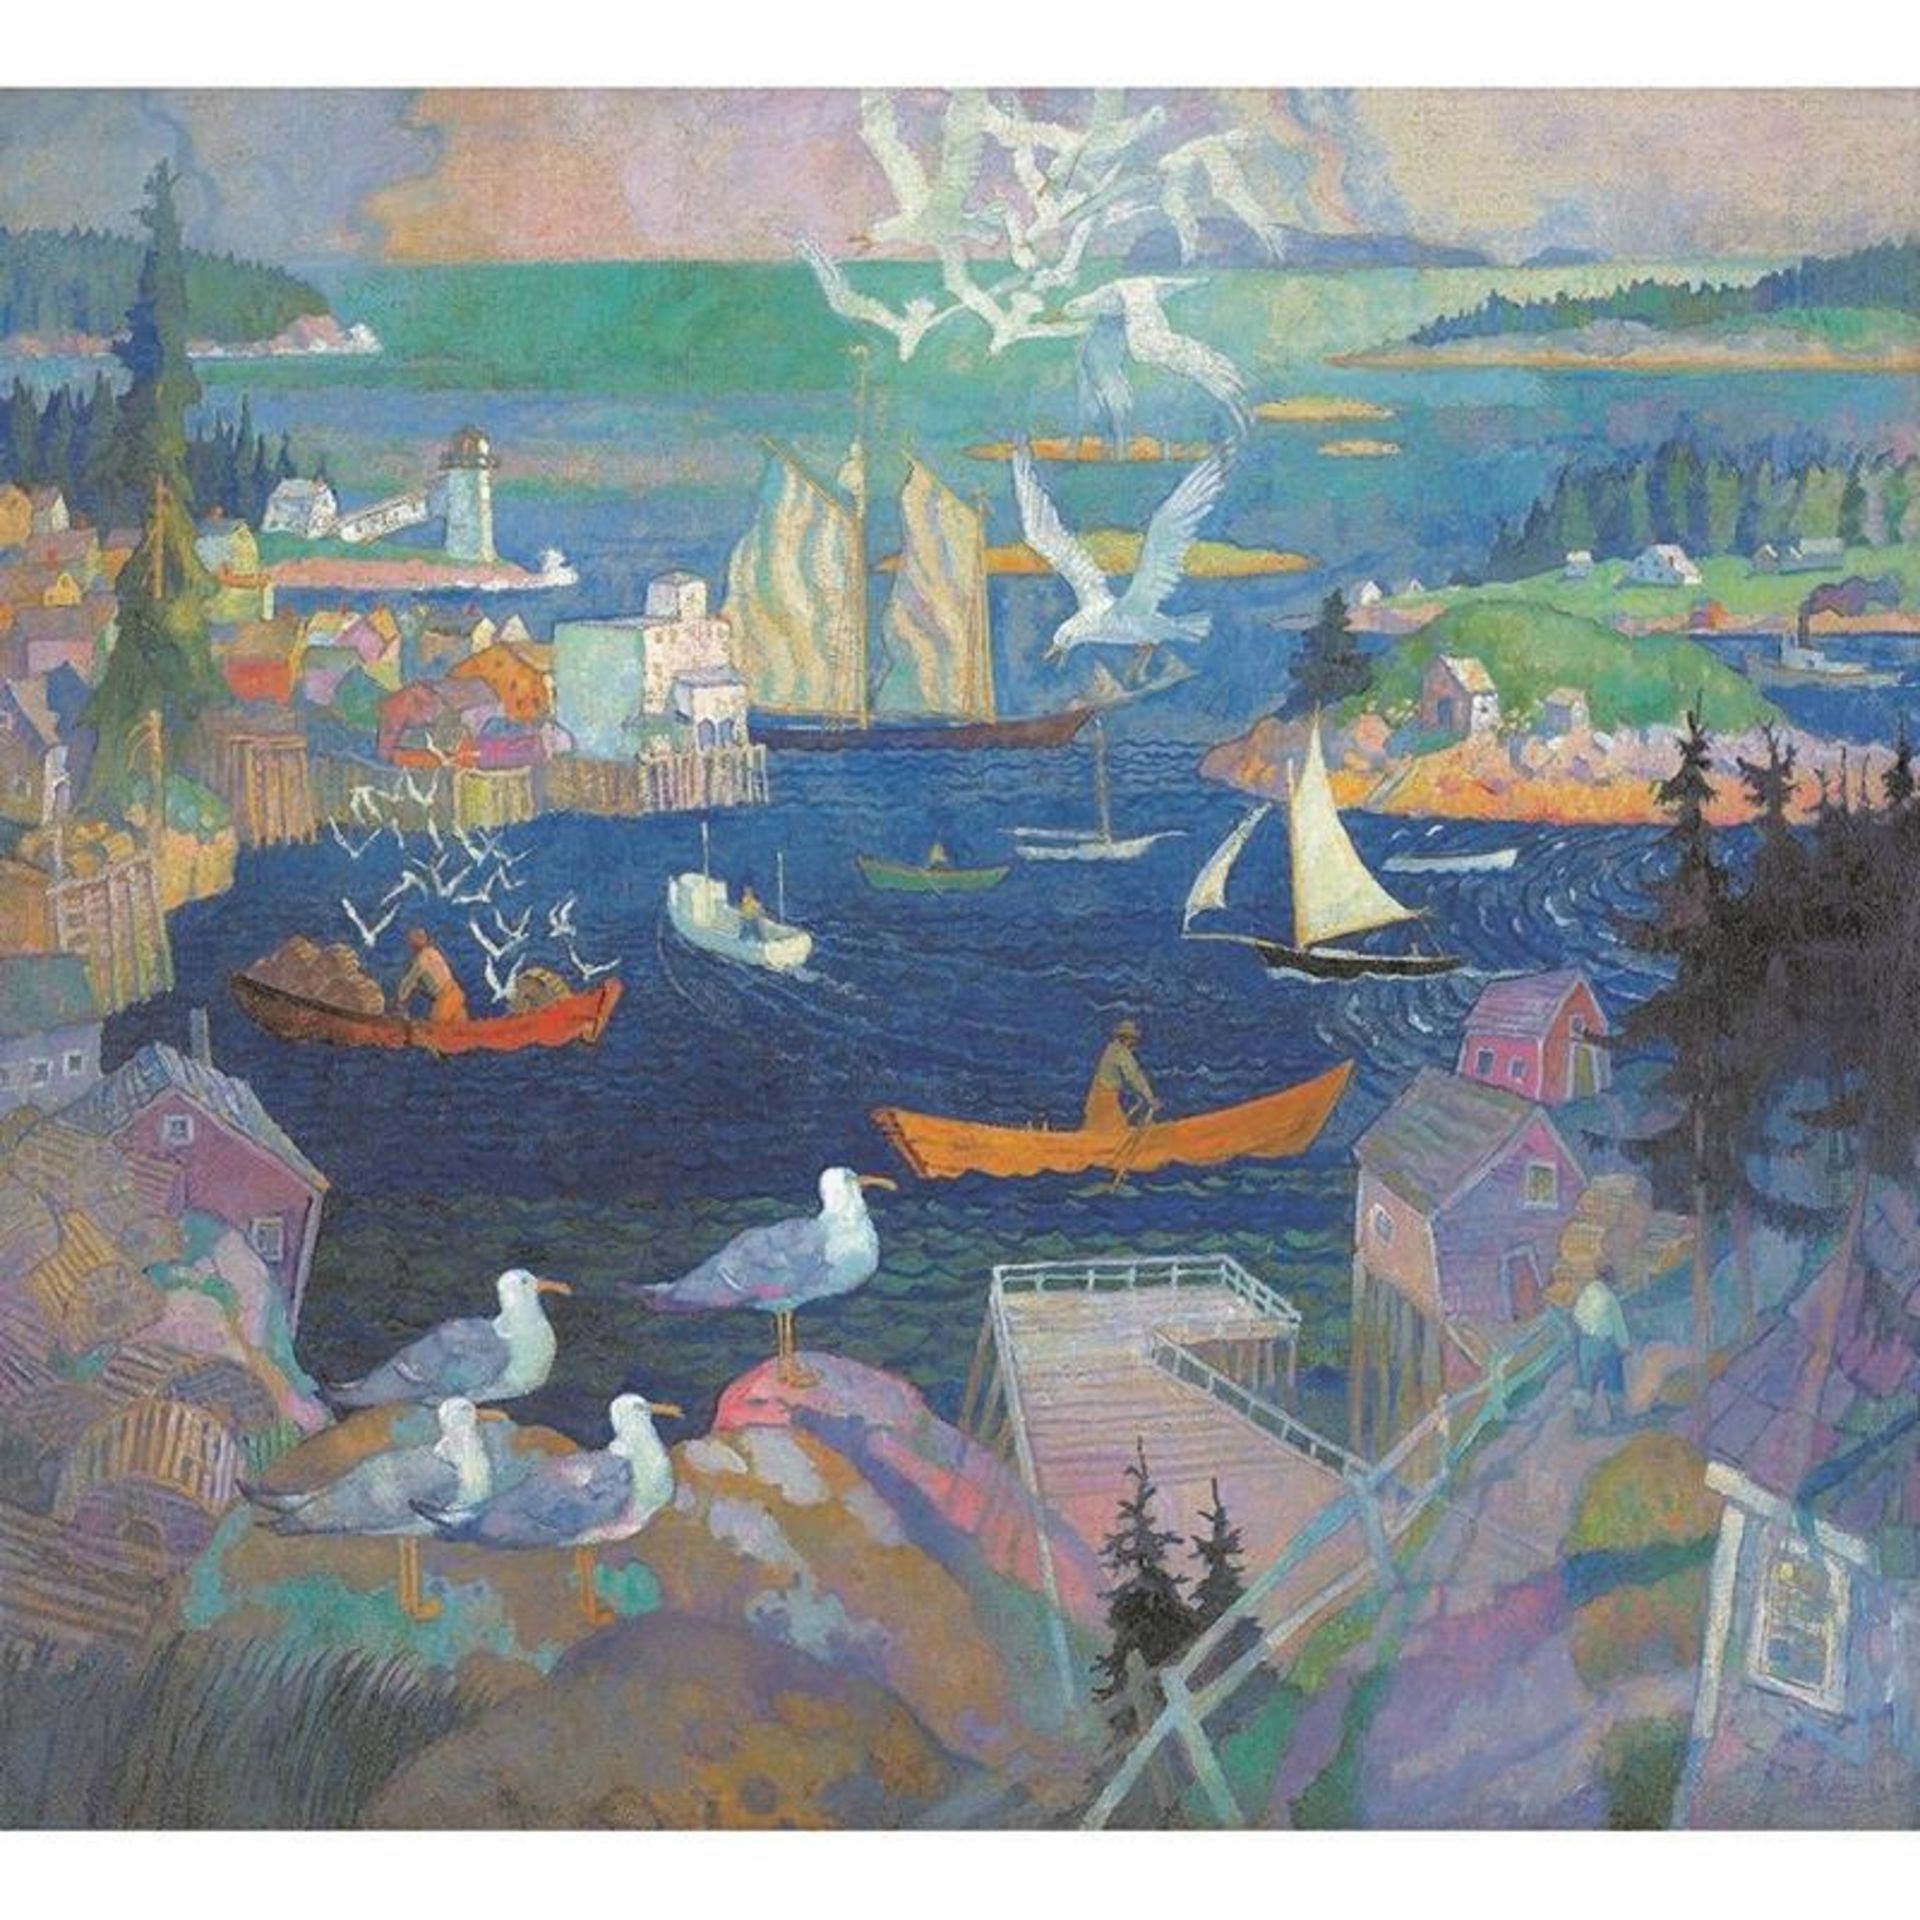 N.C. Wyeth "Harbor at Herring Gut, 1925" Offset Lithograph